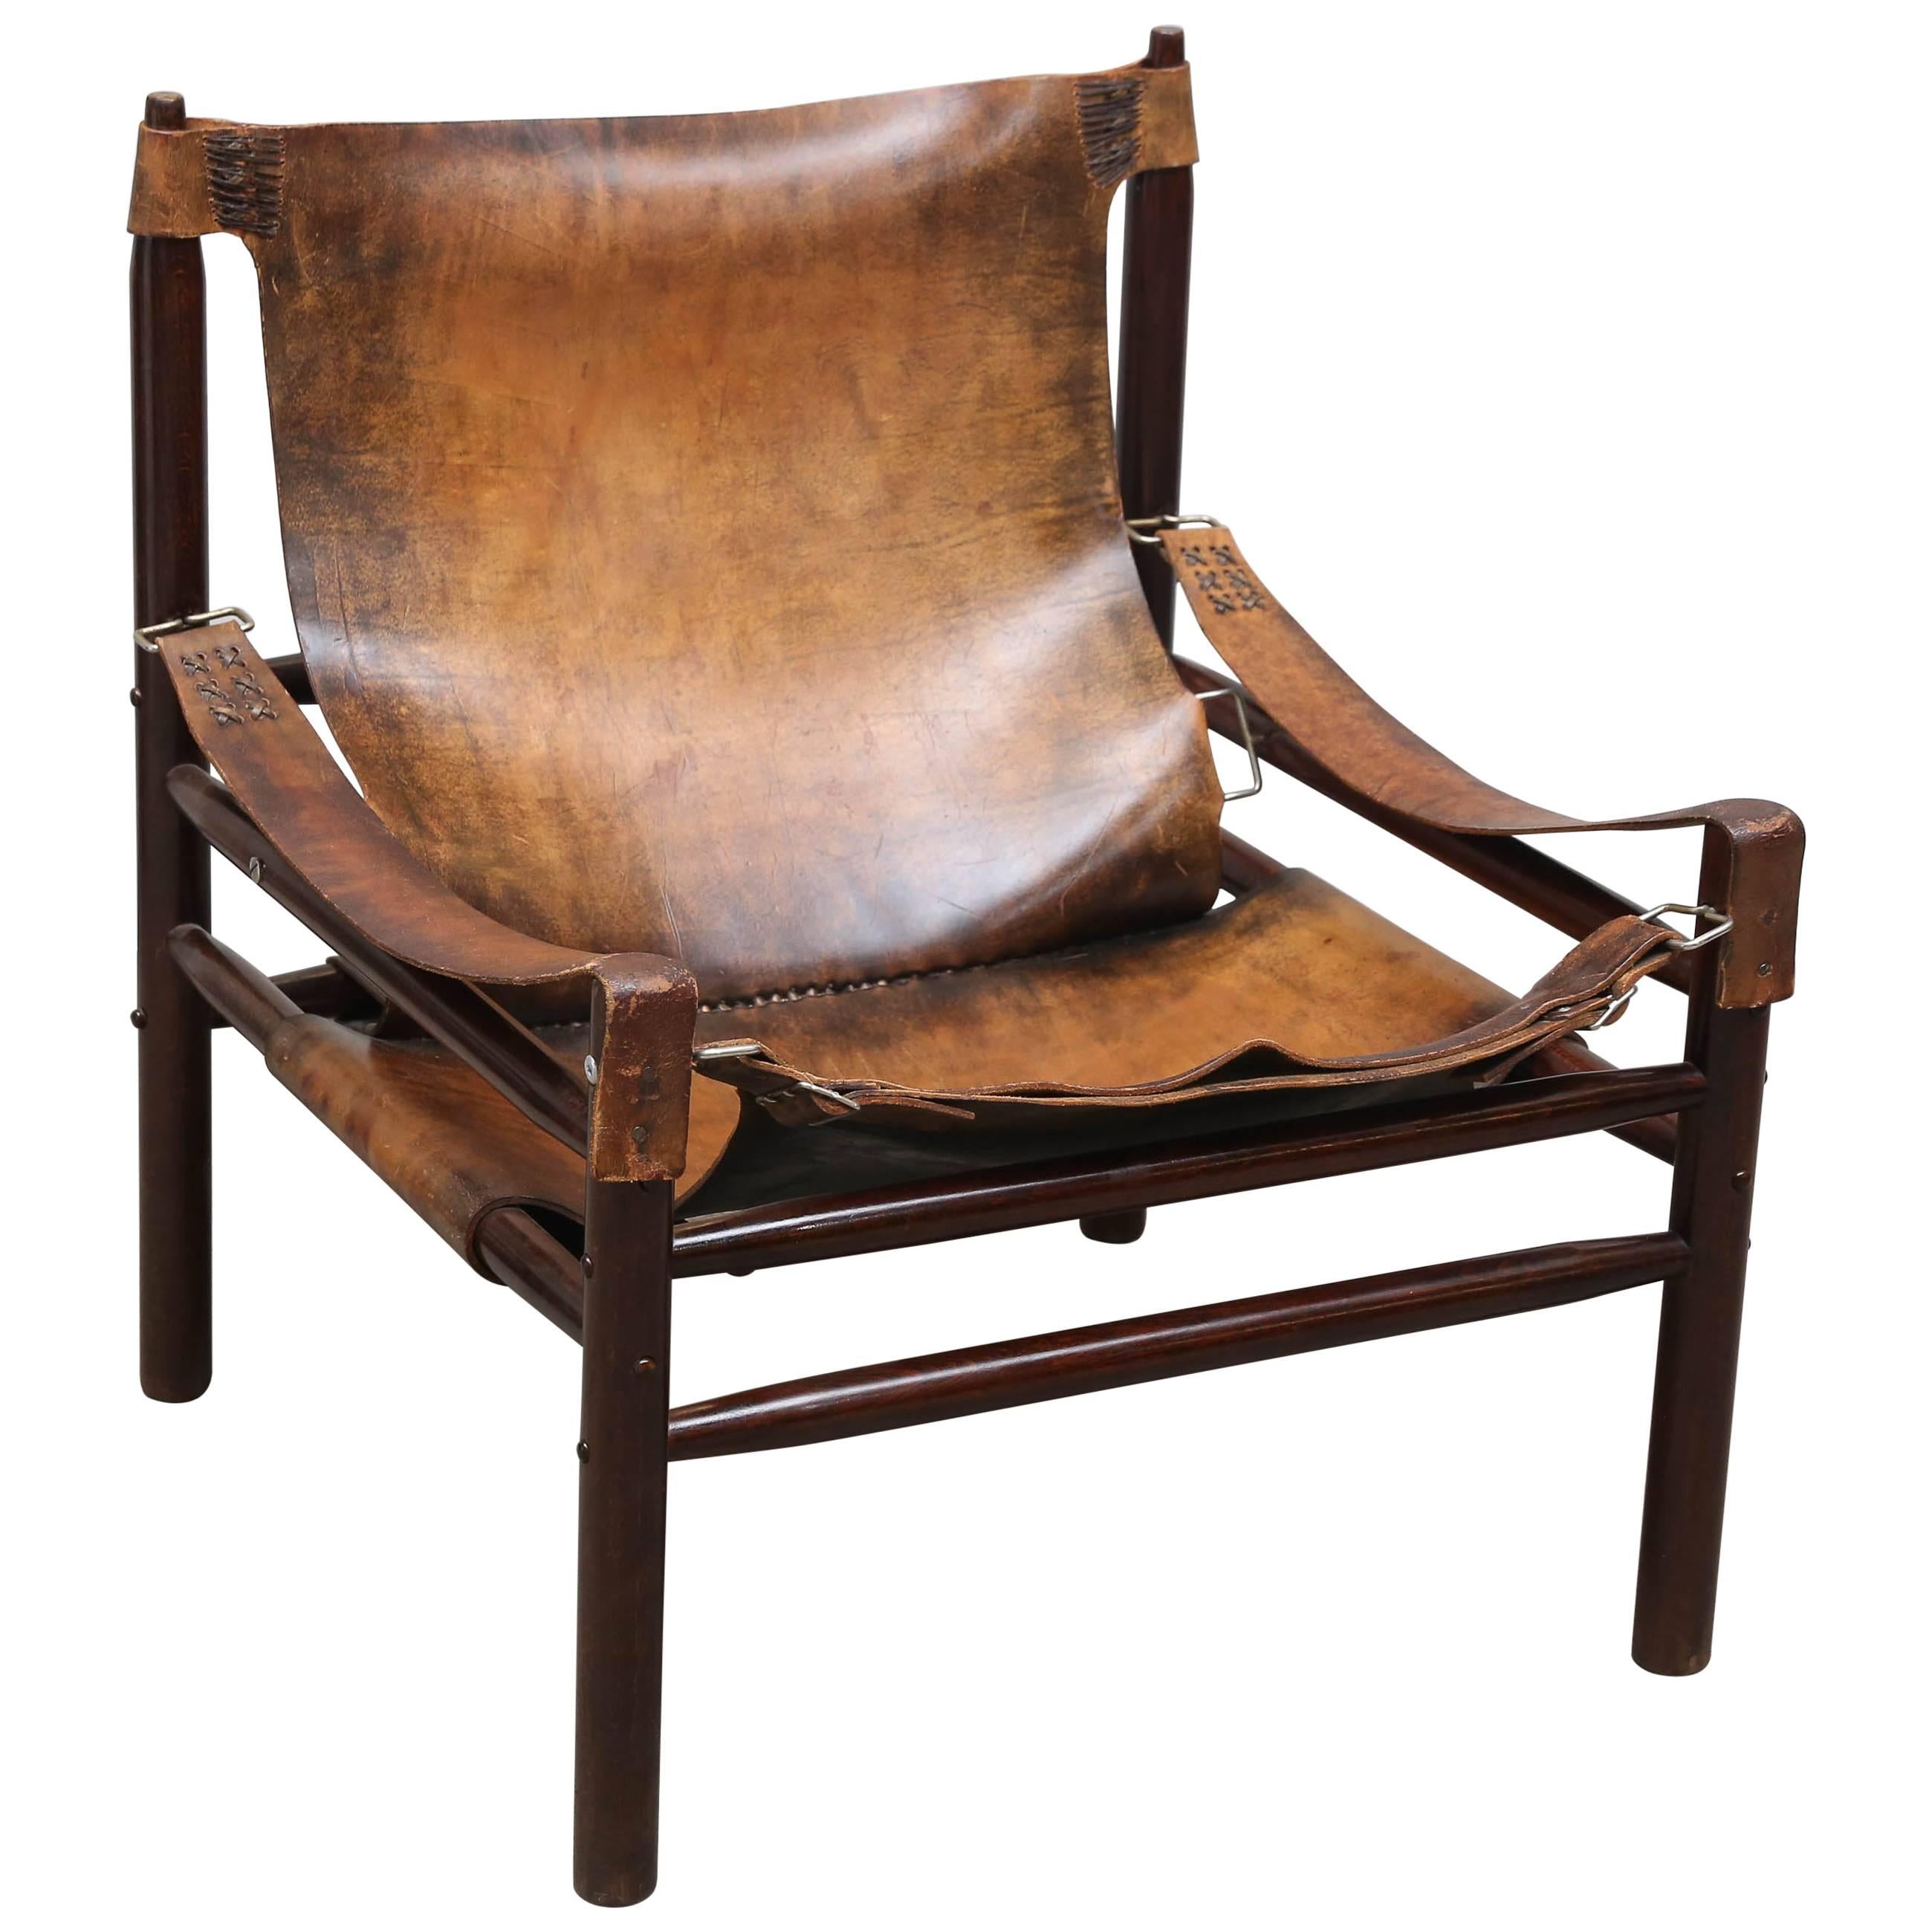 Hungarian Leather Chair, c. 1940s